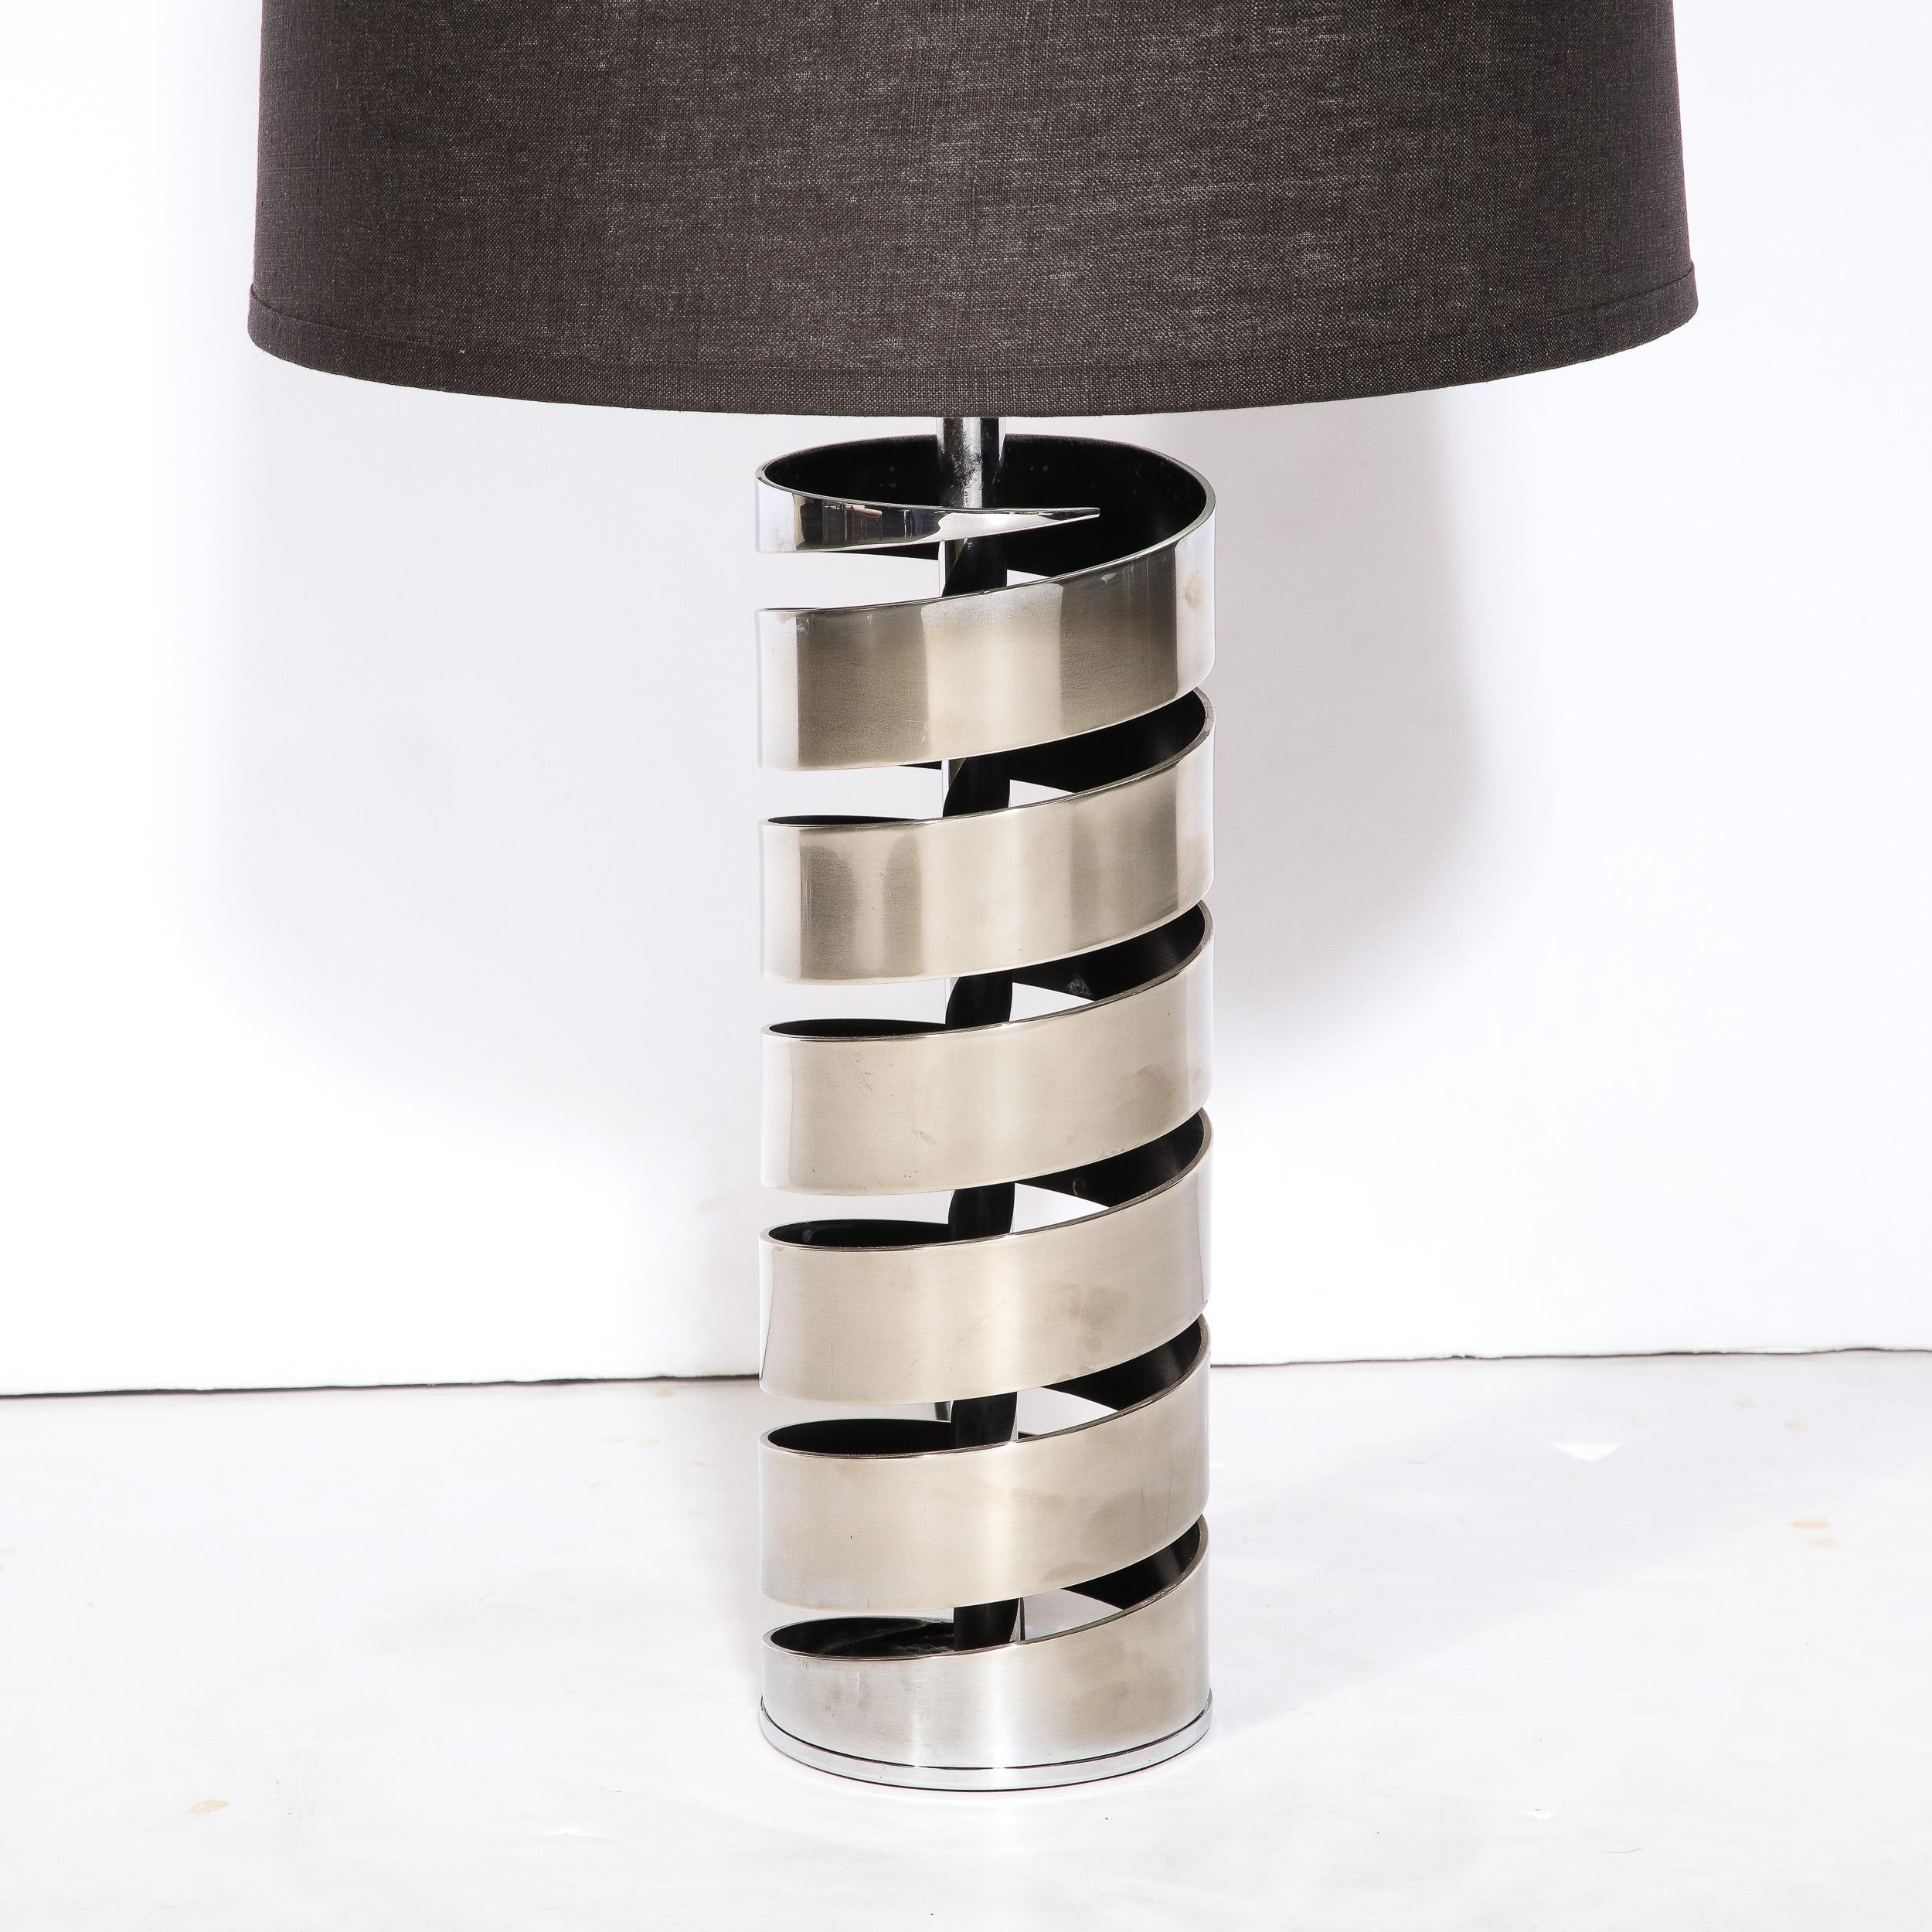 American Modernist Torqued Spiral Form Table Lamp in Satin Nickel For Sale